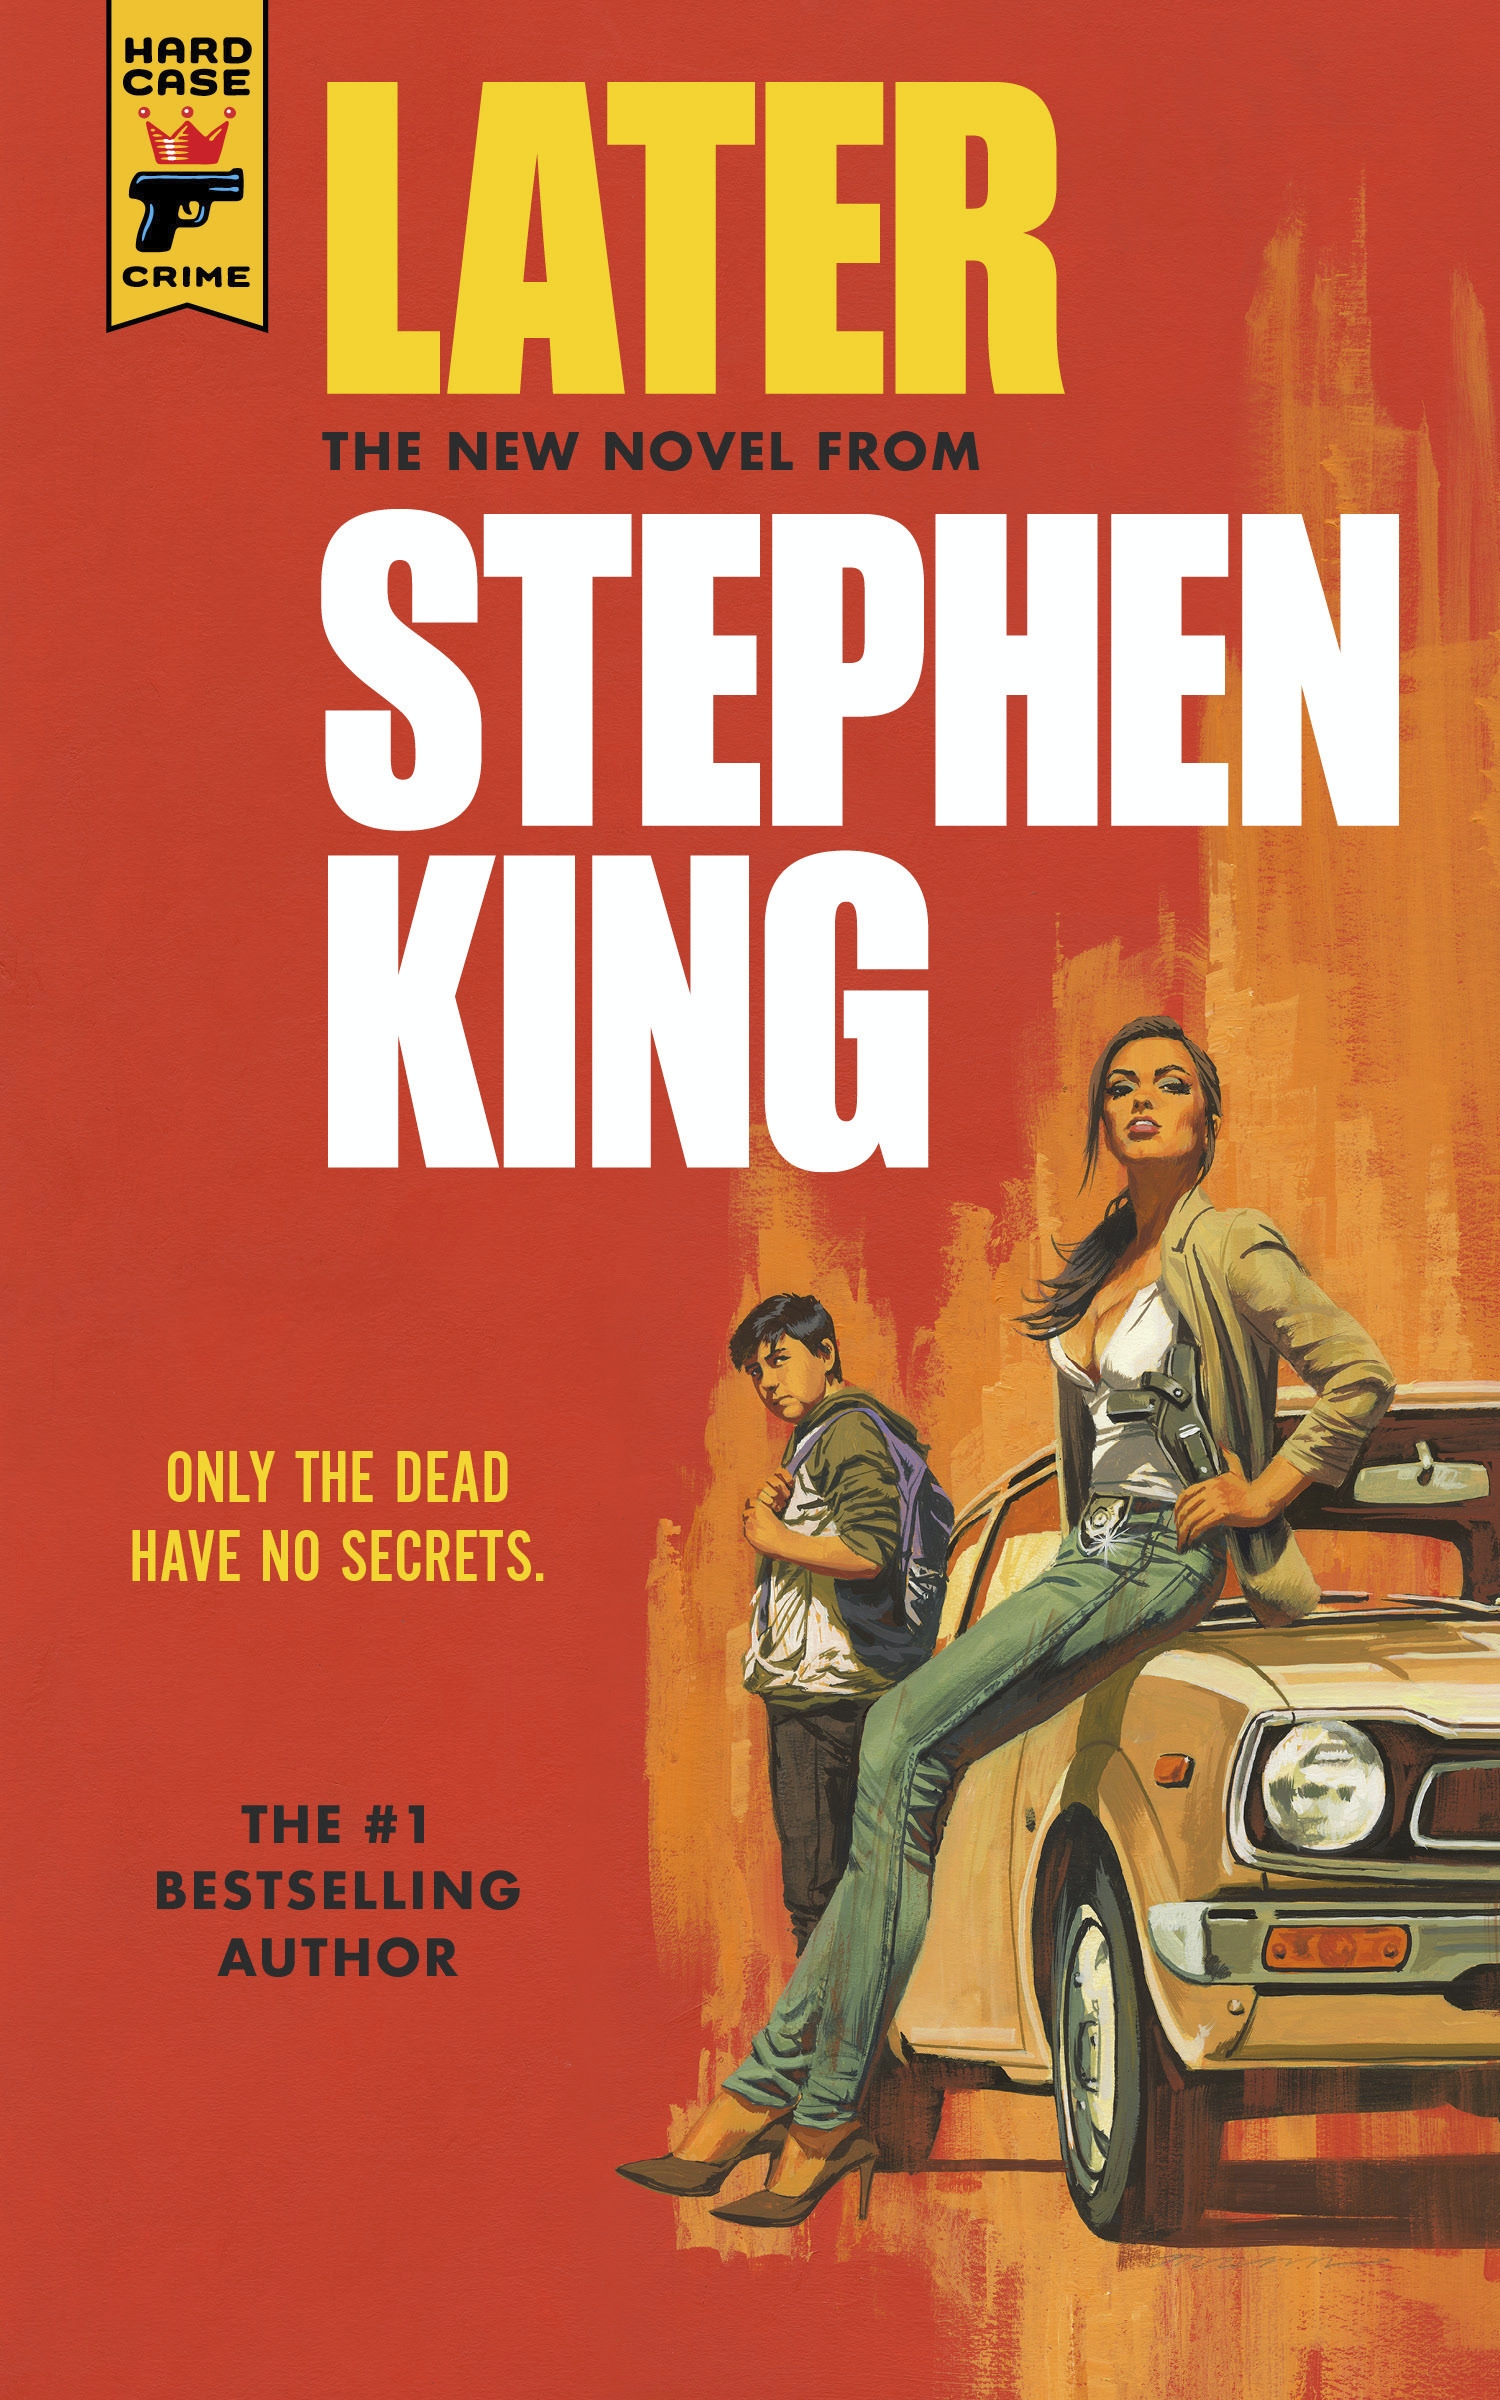 stephen king later book